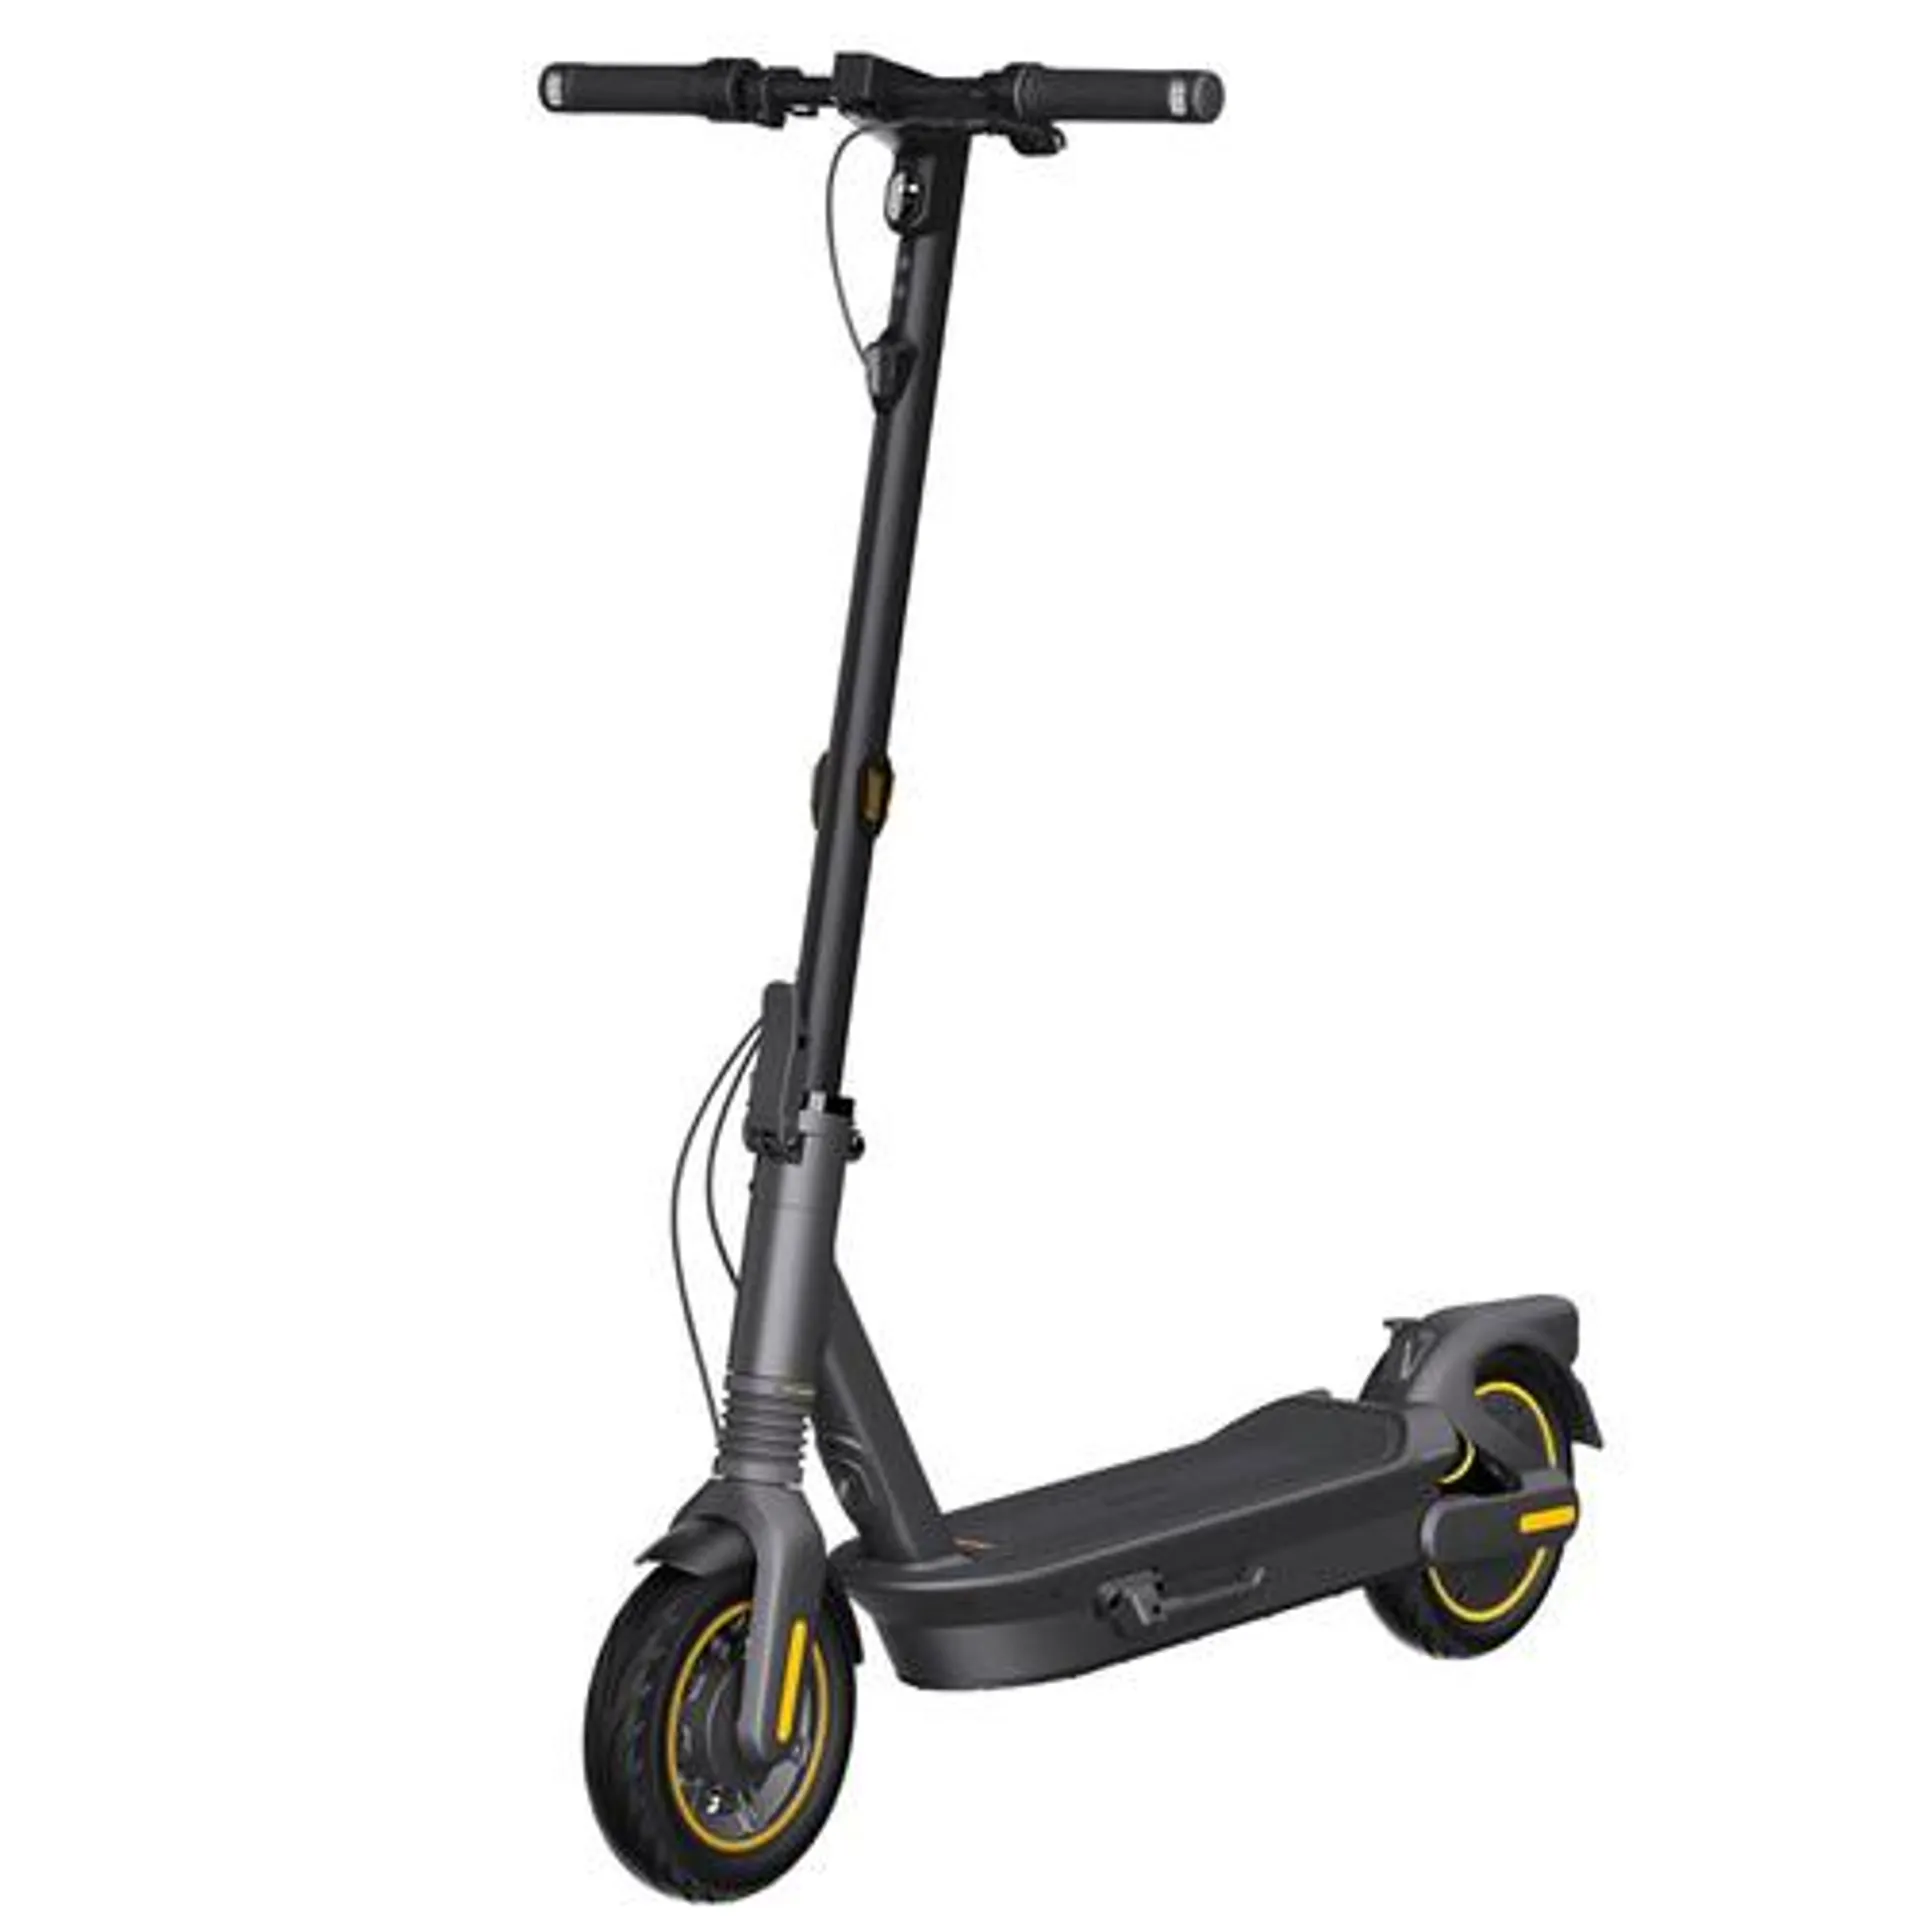 Max G2 Electric Kick Scooter Foldable w/ 43 Mile Range and 22 MPH Max Speed - Black